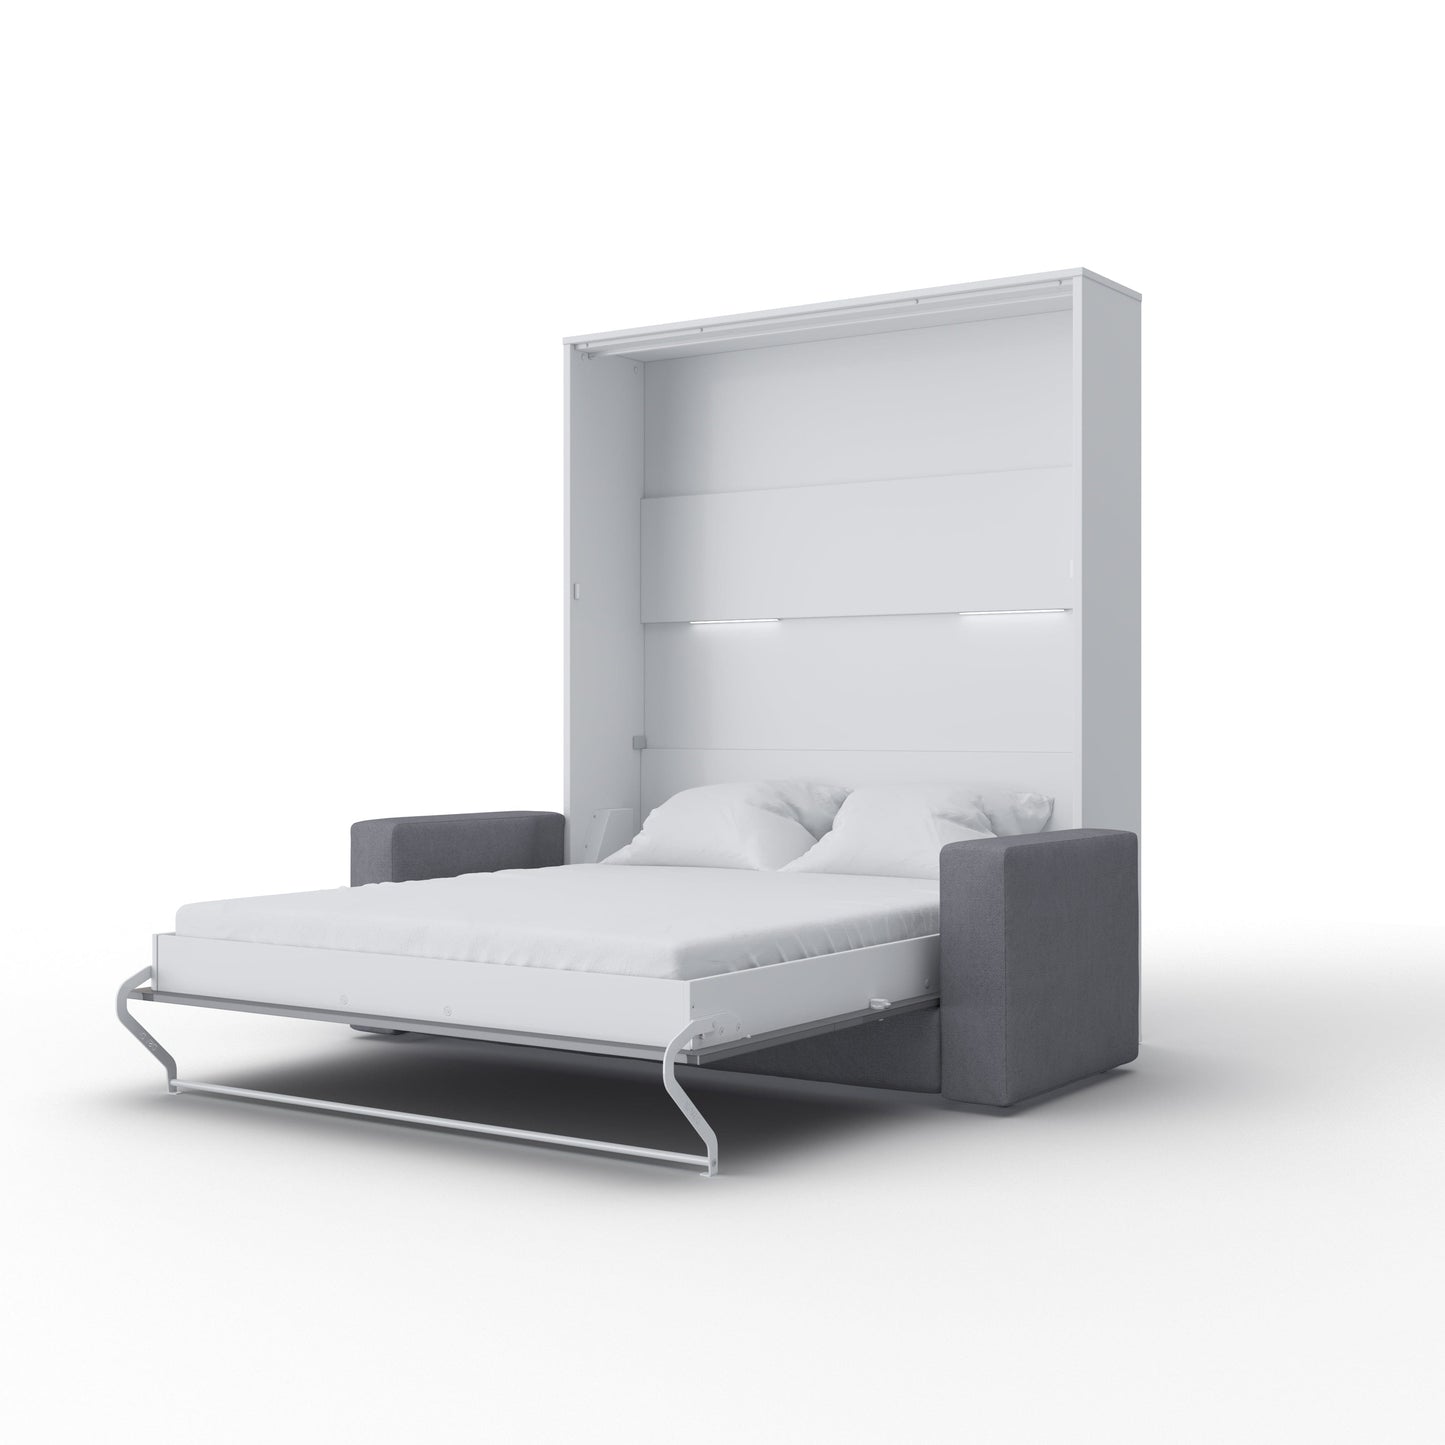 Maxima House European Queen size Vertical Murphy Bed with a Sofa, Invento IN014W-G